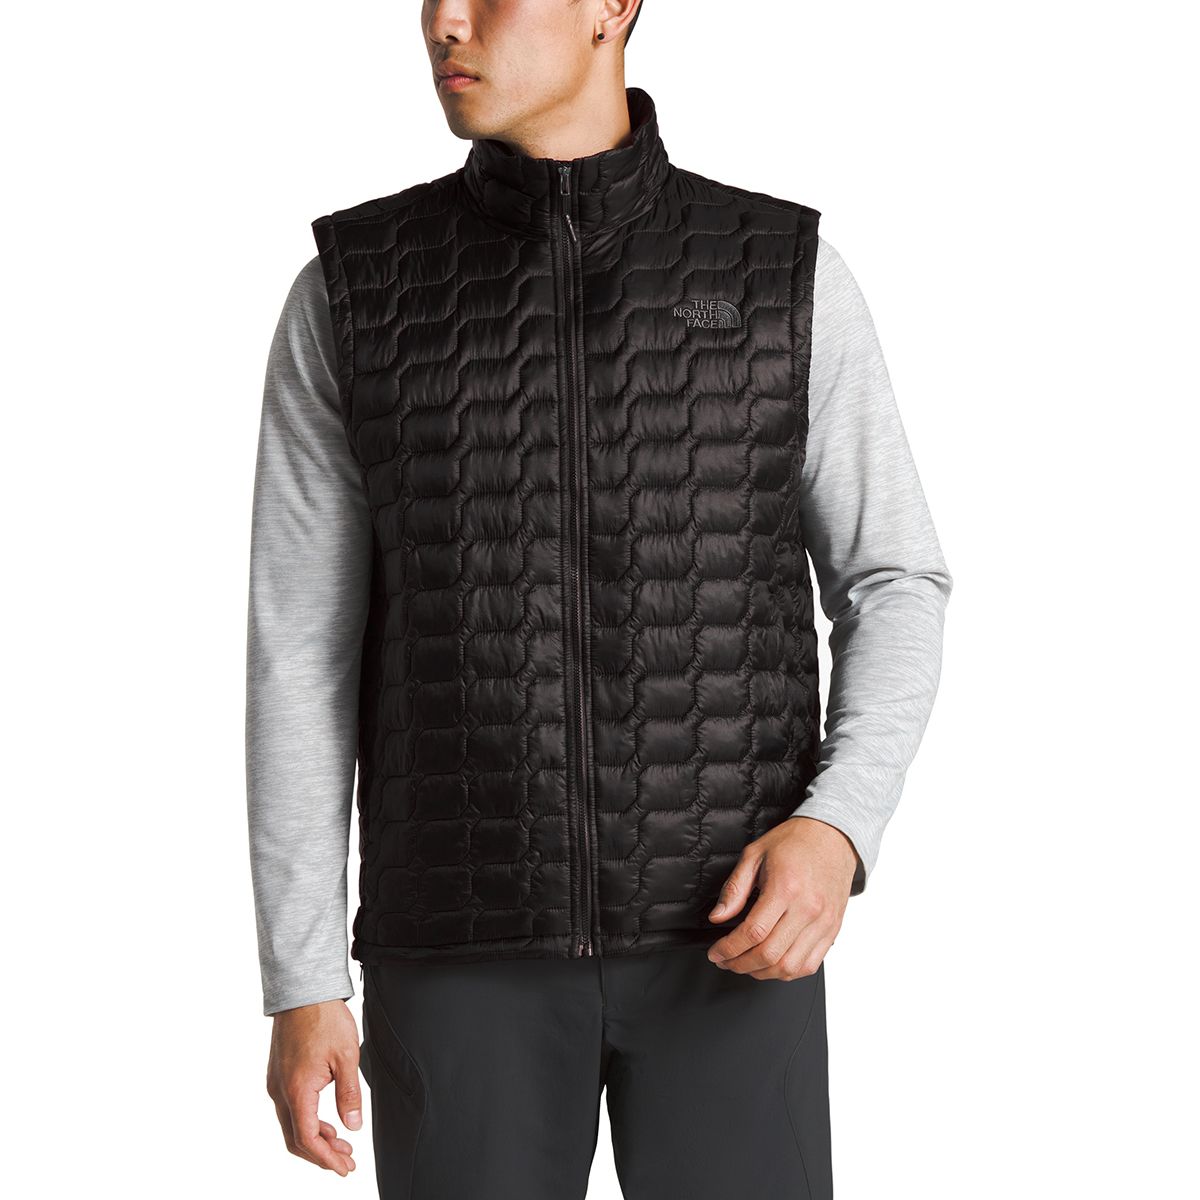 mens north face thermoball vest